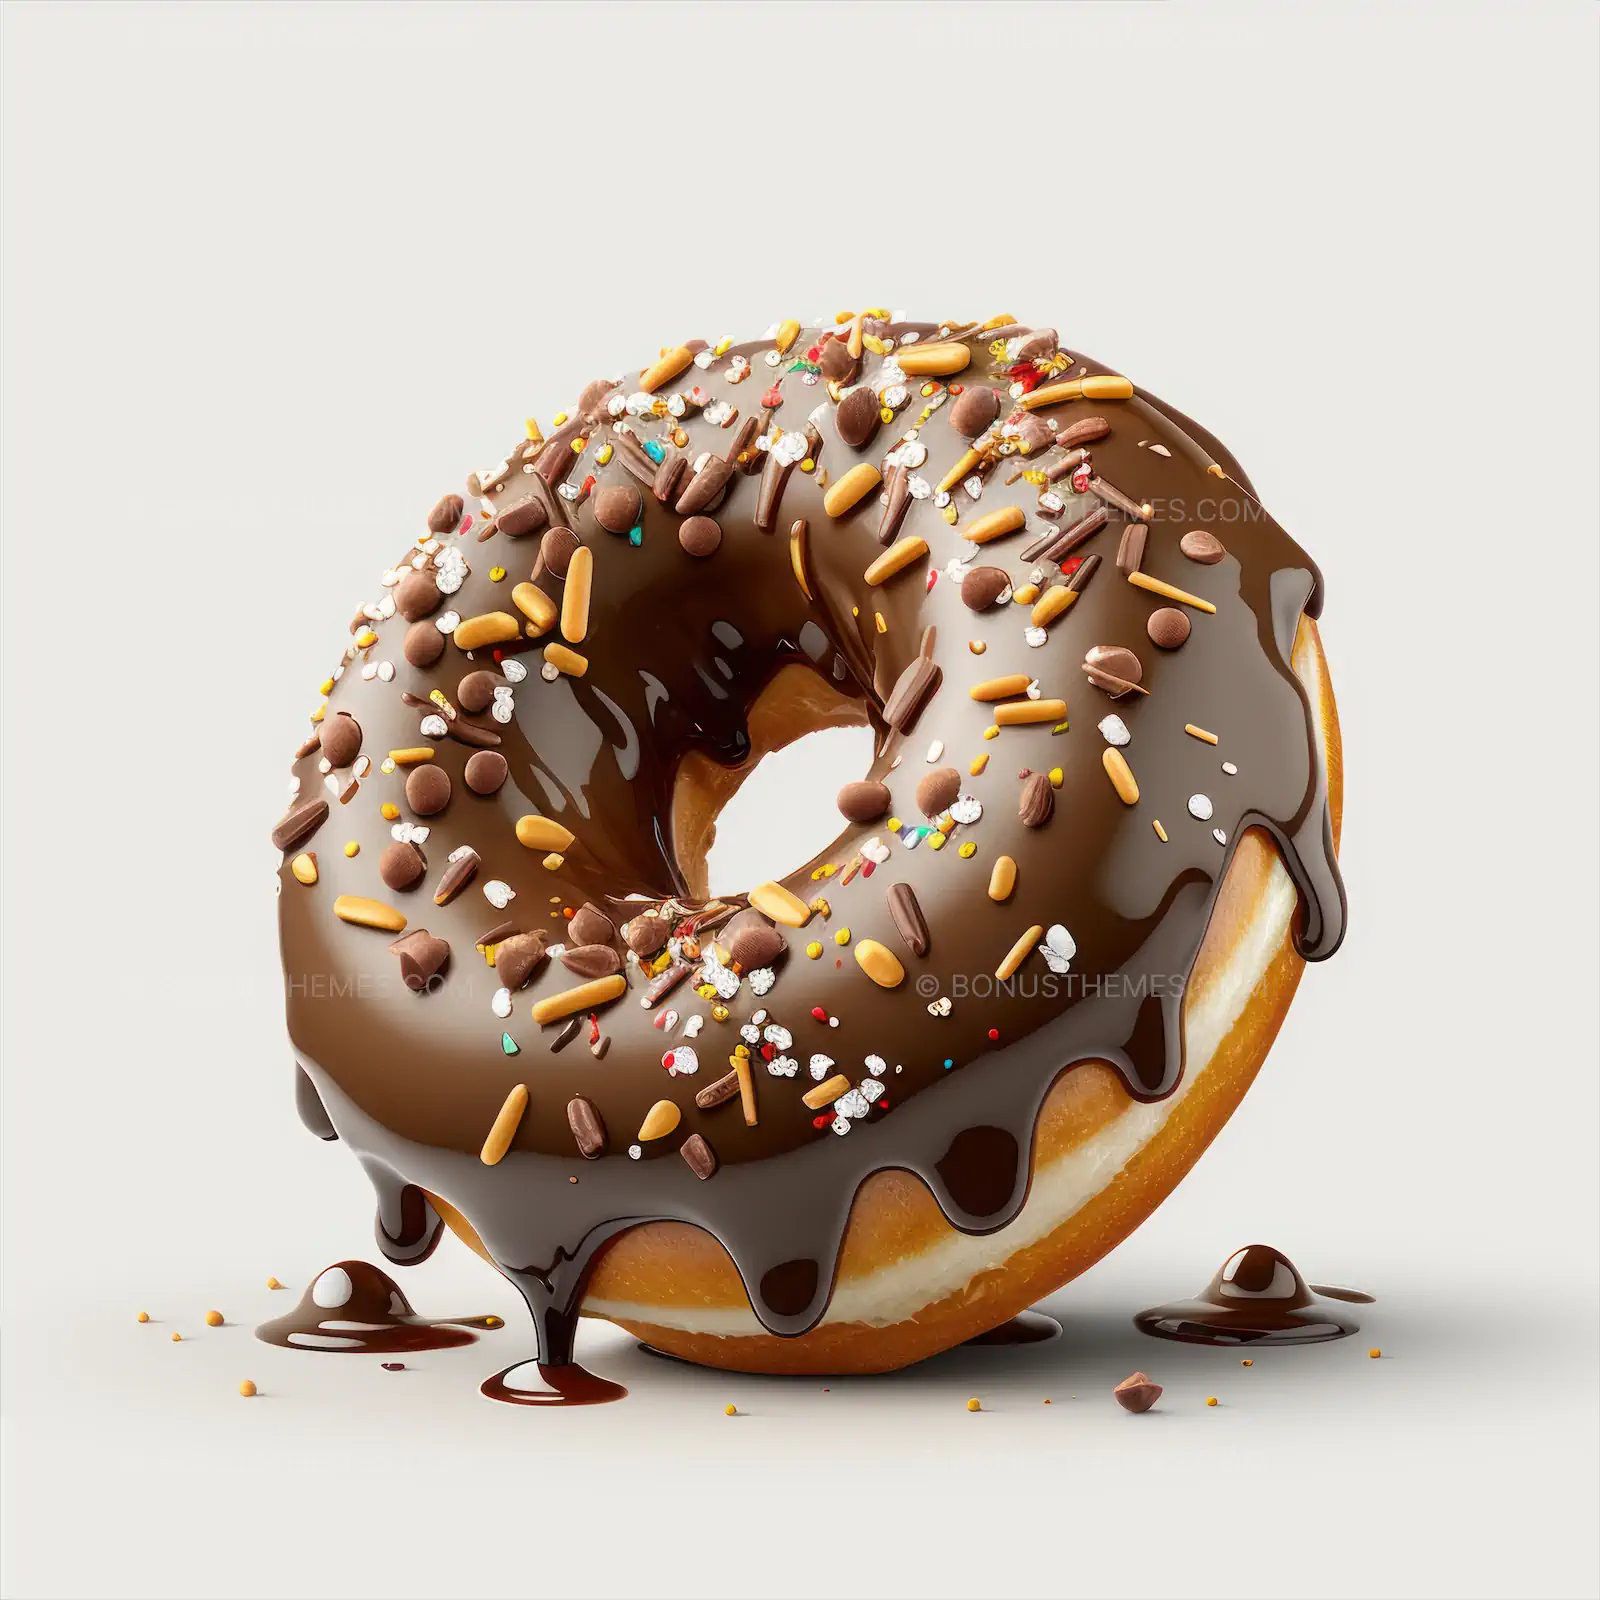 Chocolate donut with sprinkles on a white background